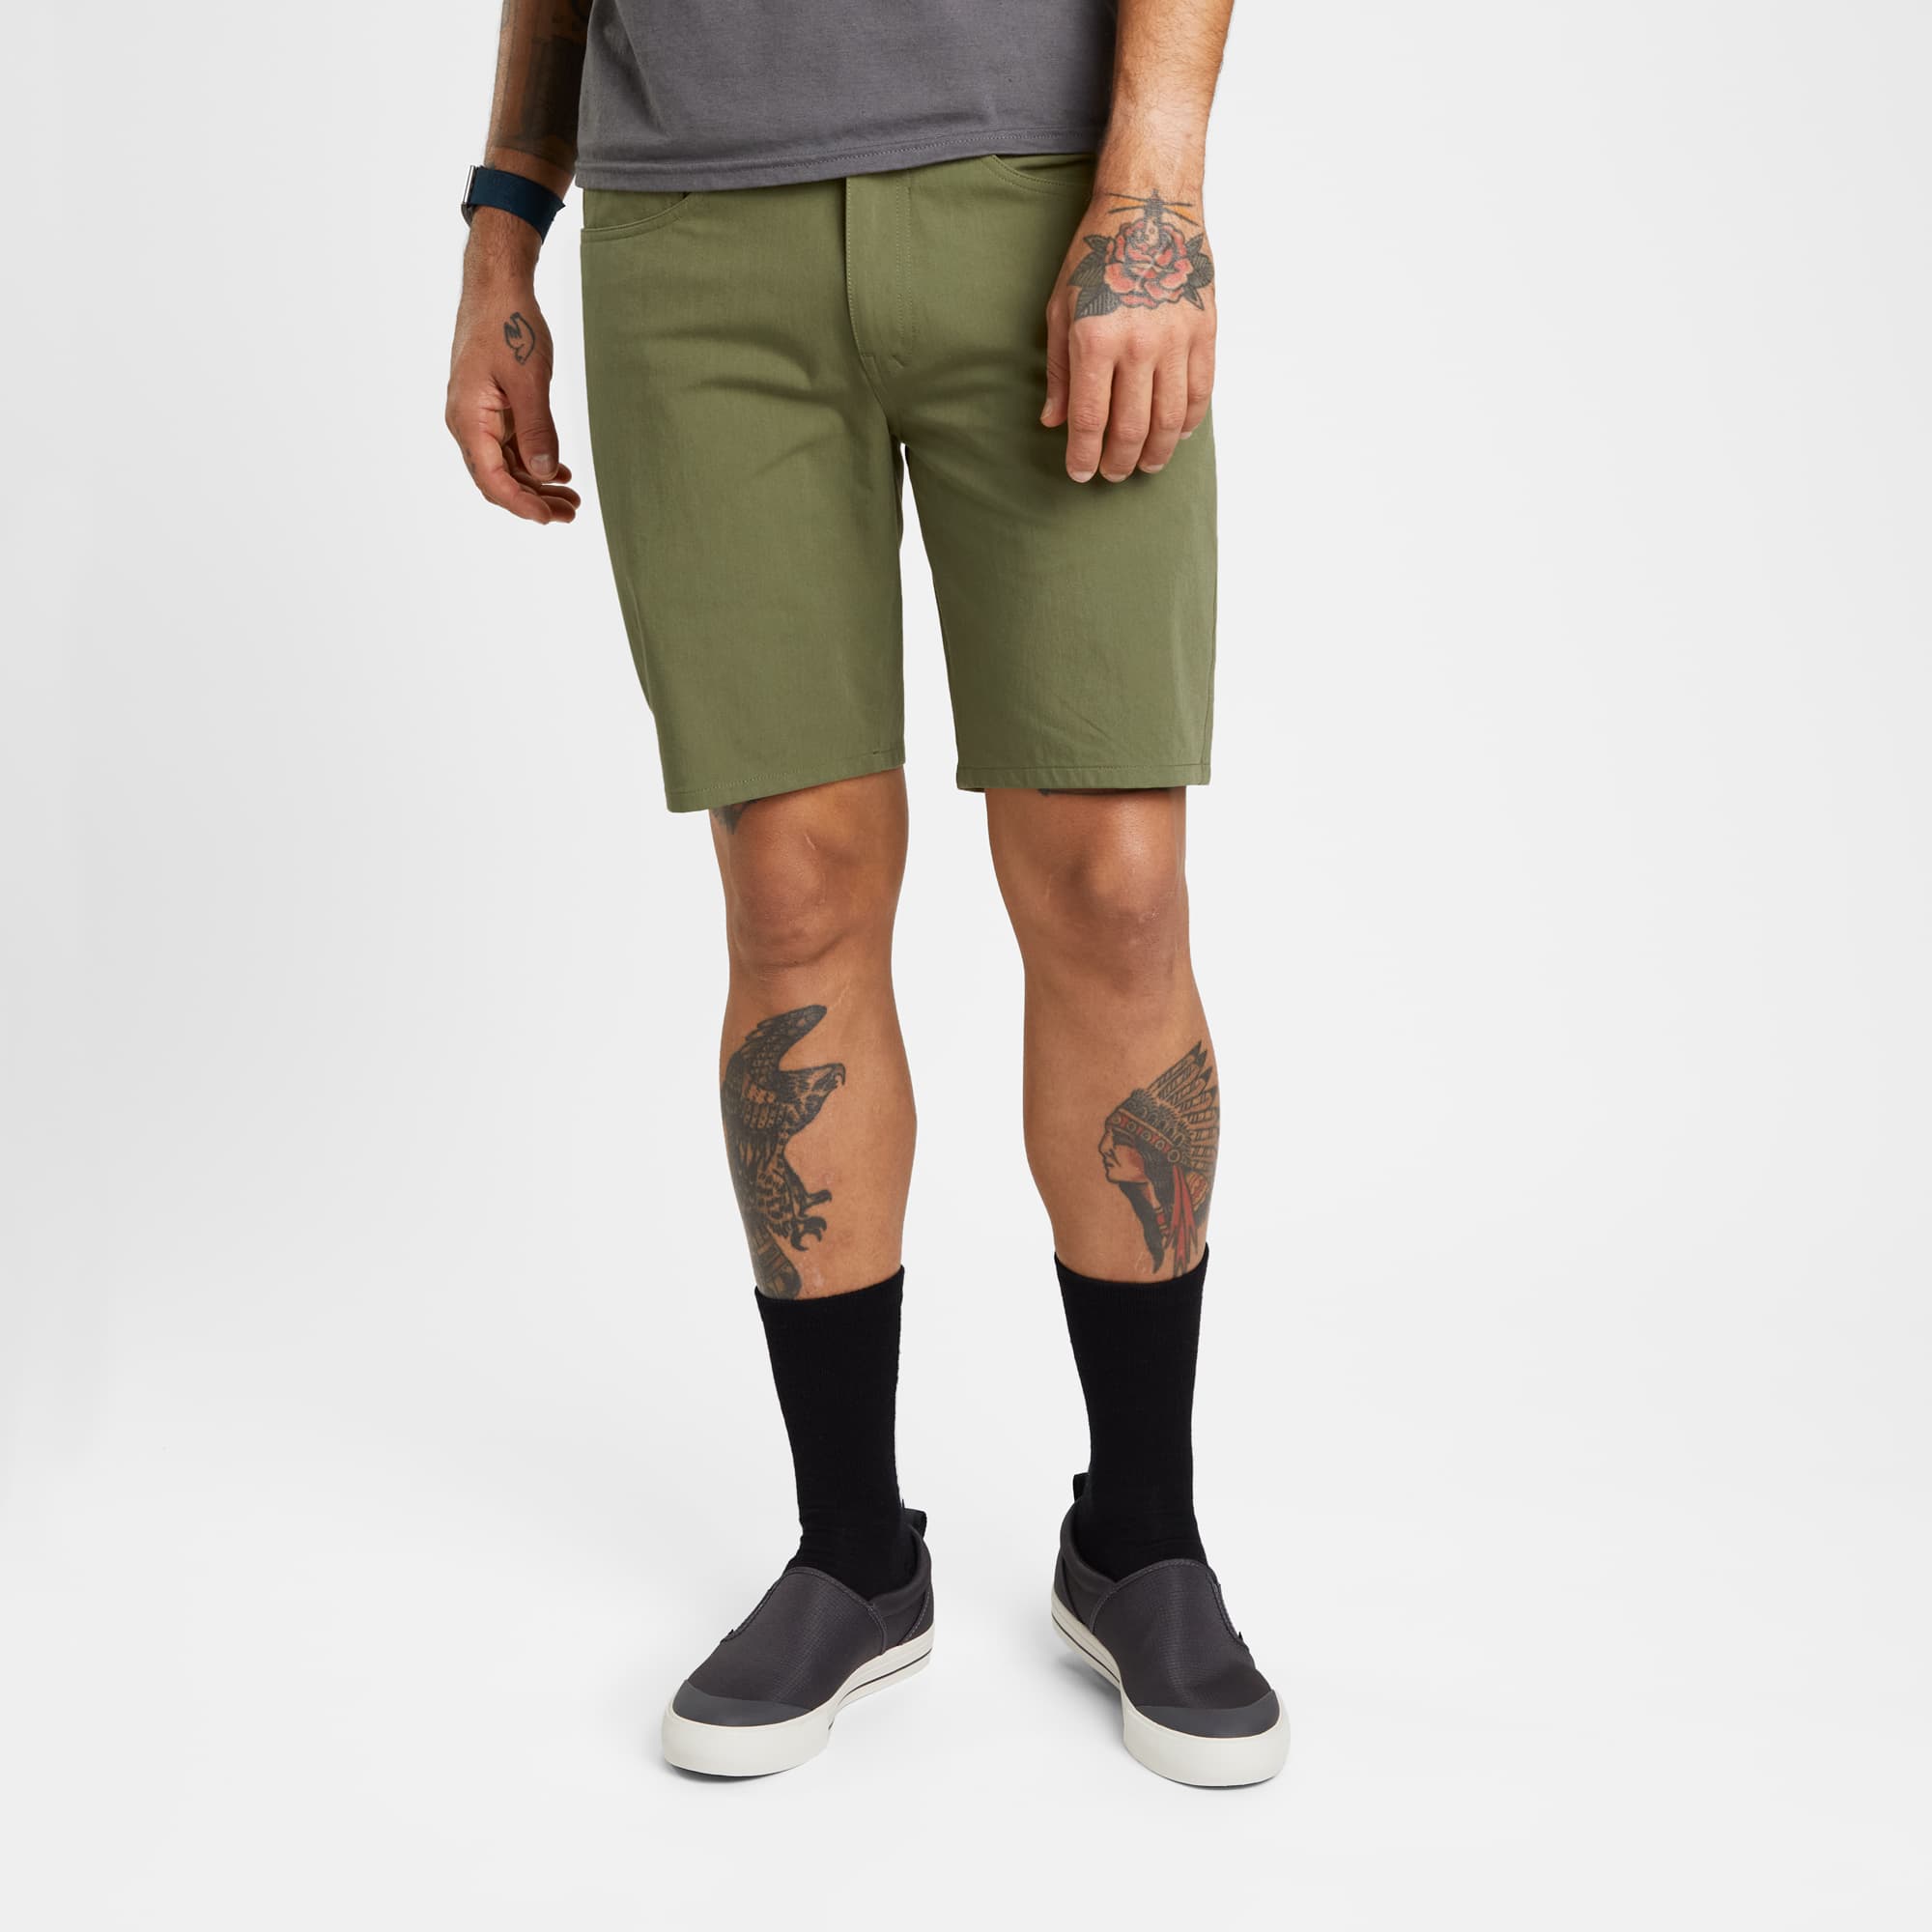 Men's Madrona tech 5-pocket short in green worn by a man #color_olive branch